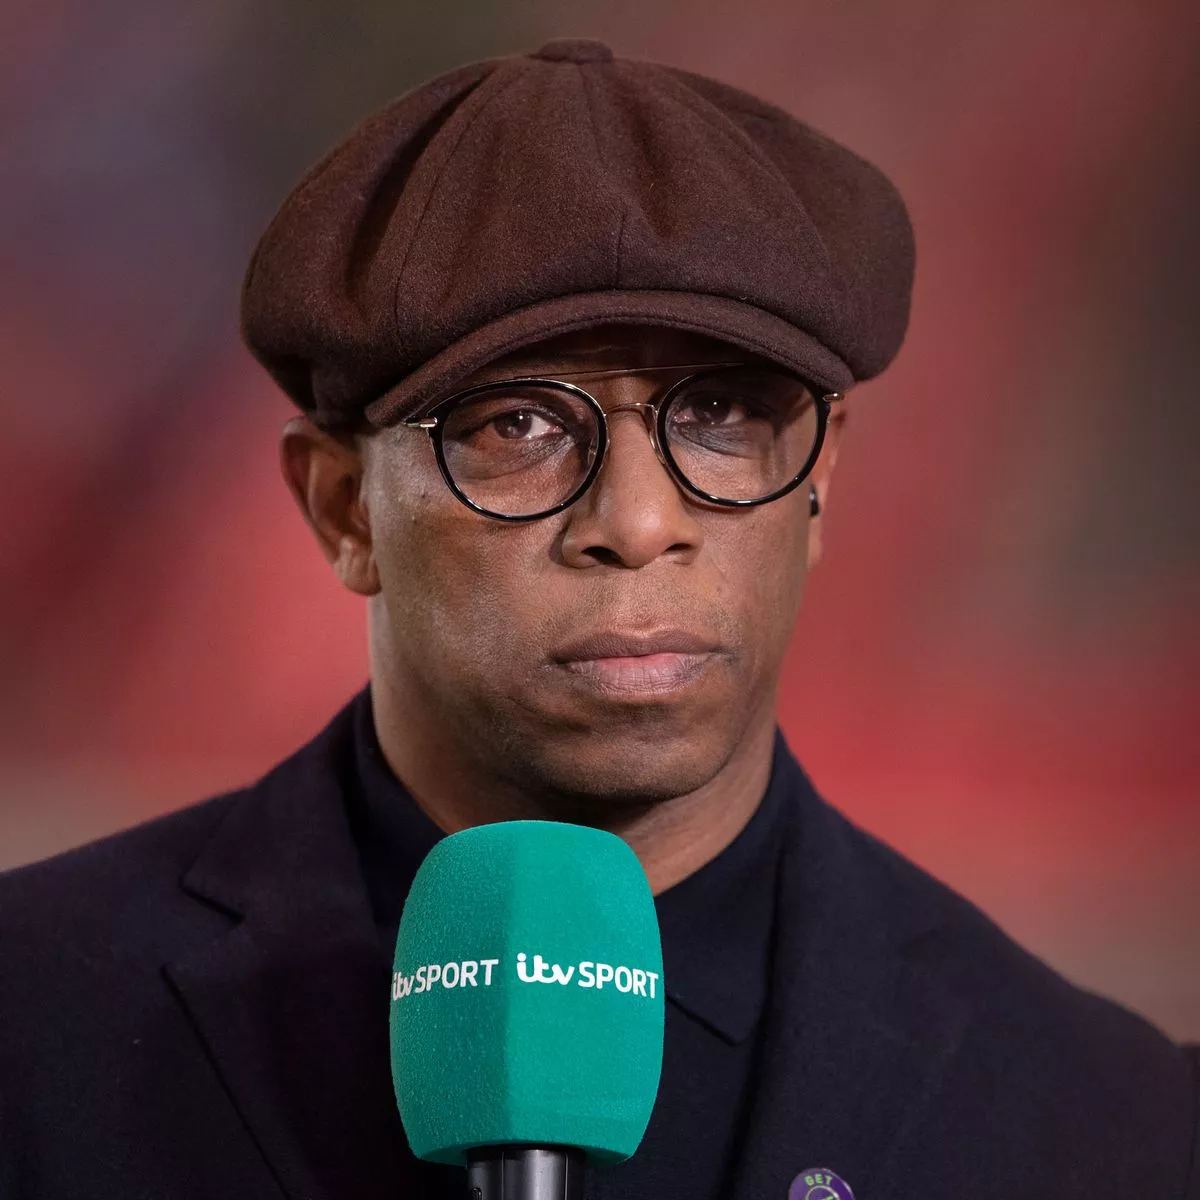 I'm telling you': Ian Wright shares his prediction for the Tottenham vs Liverpool clash